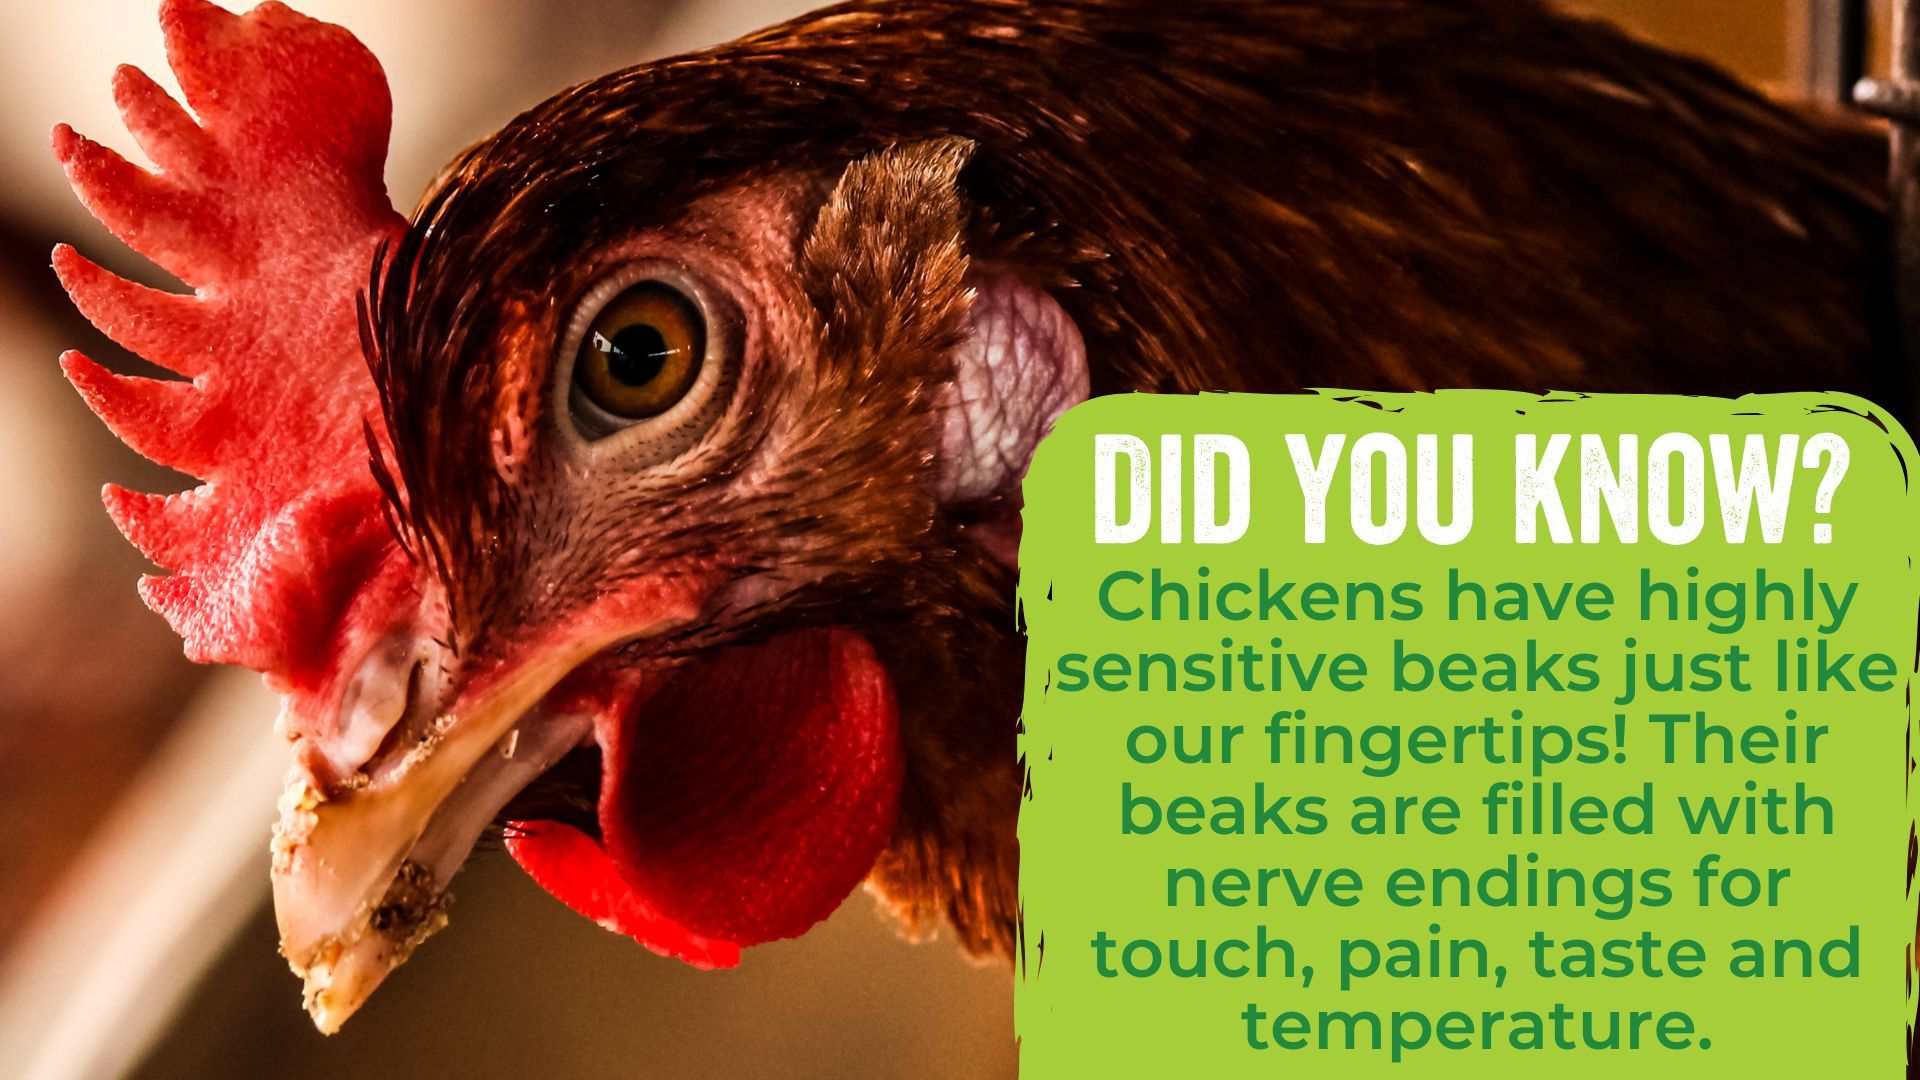 Chickens have highly sensitive beaks just like our fingertips! Their beaks are filled with nerve endings for touch, pain, taste and temperature.